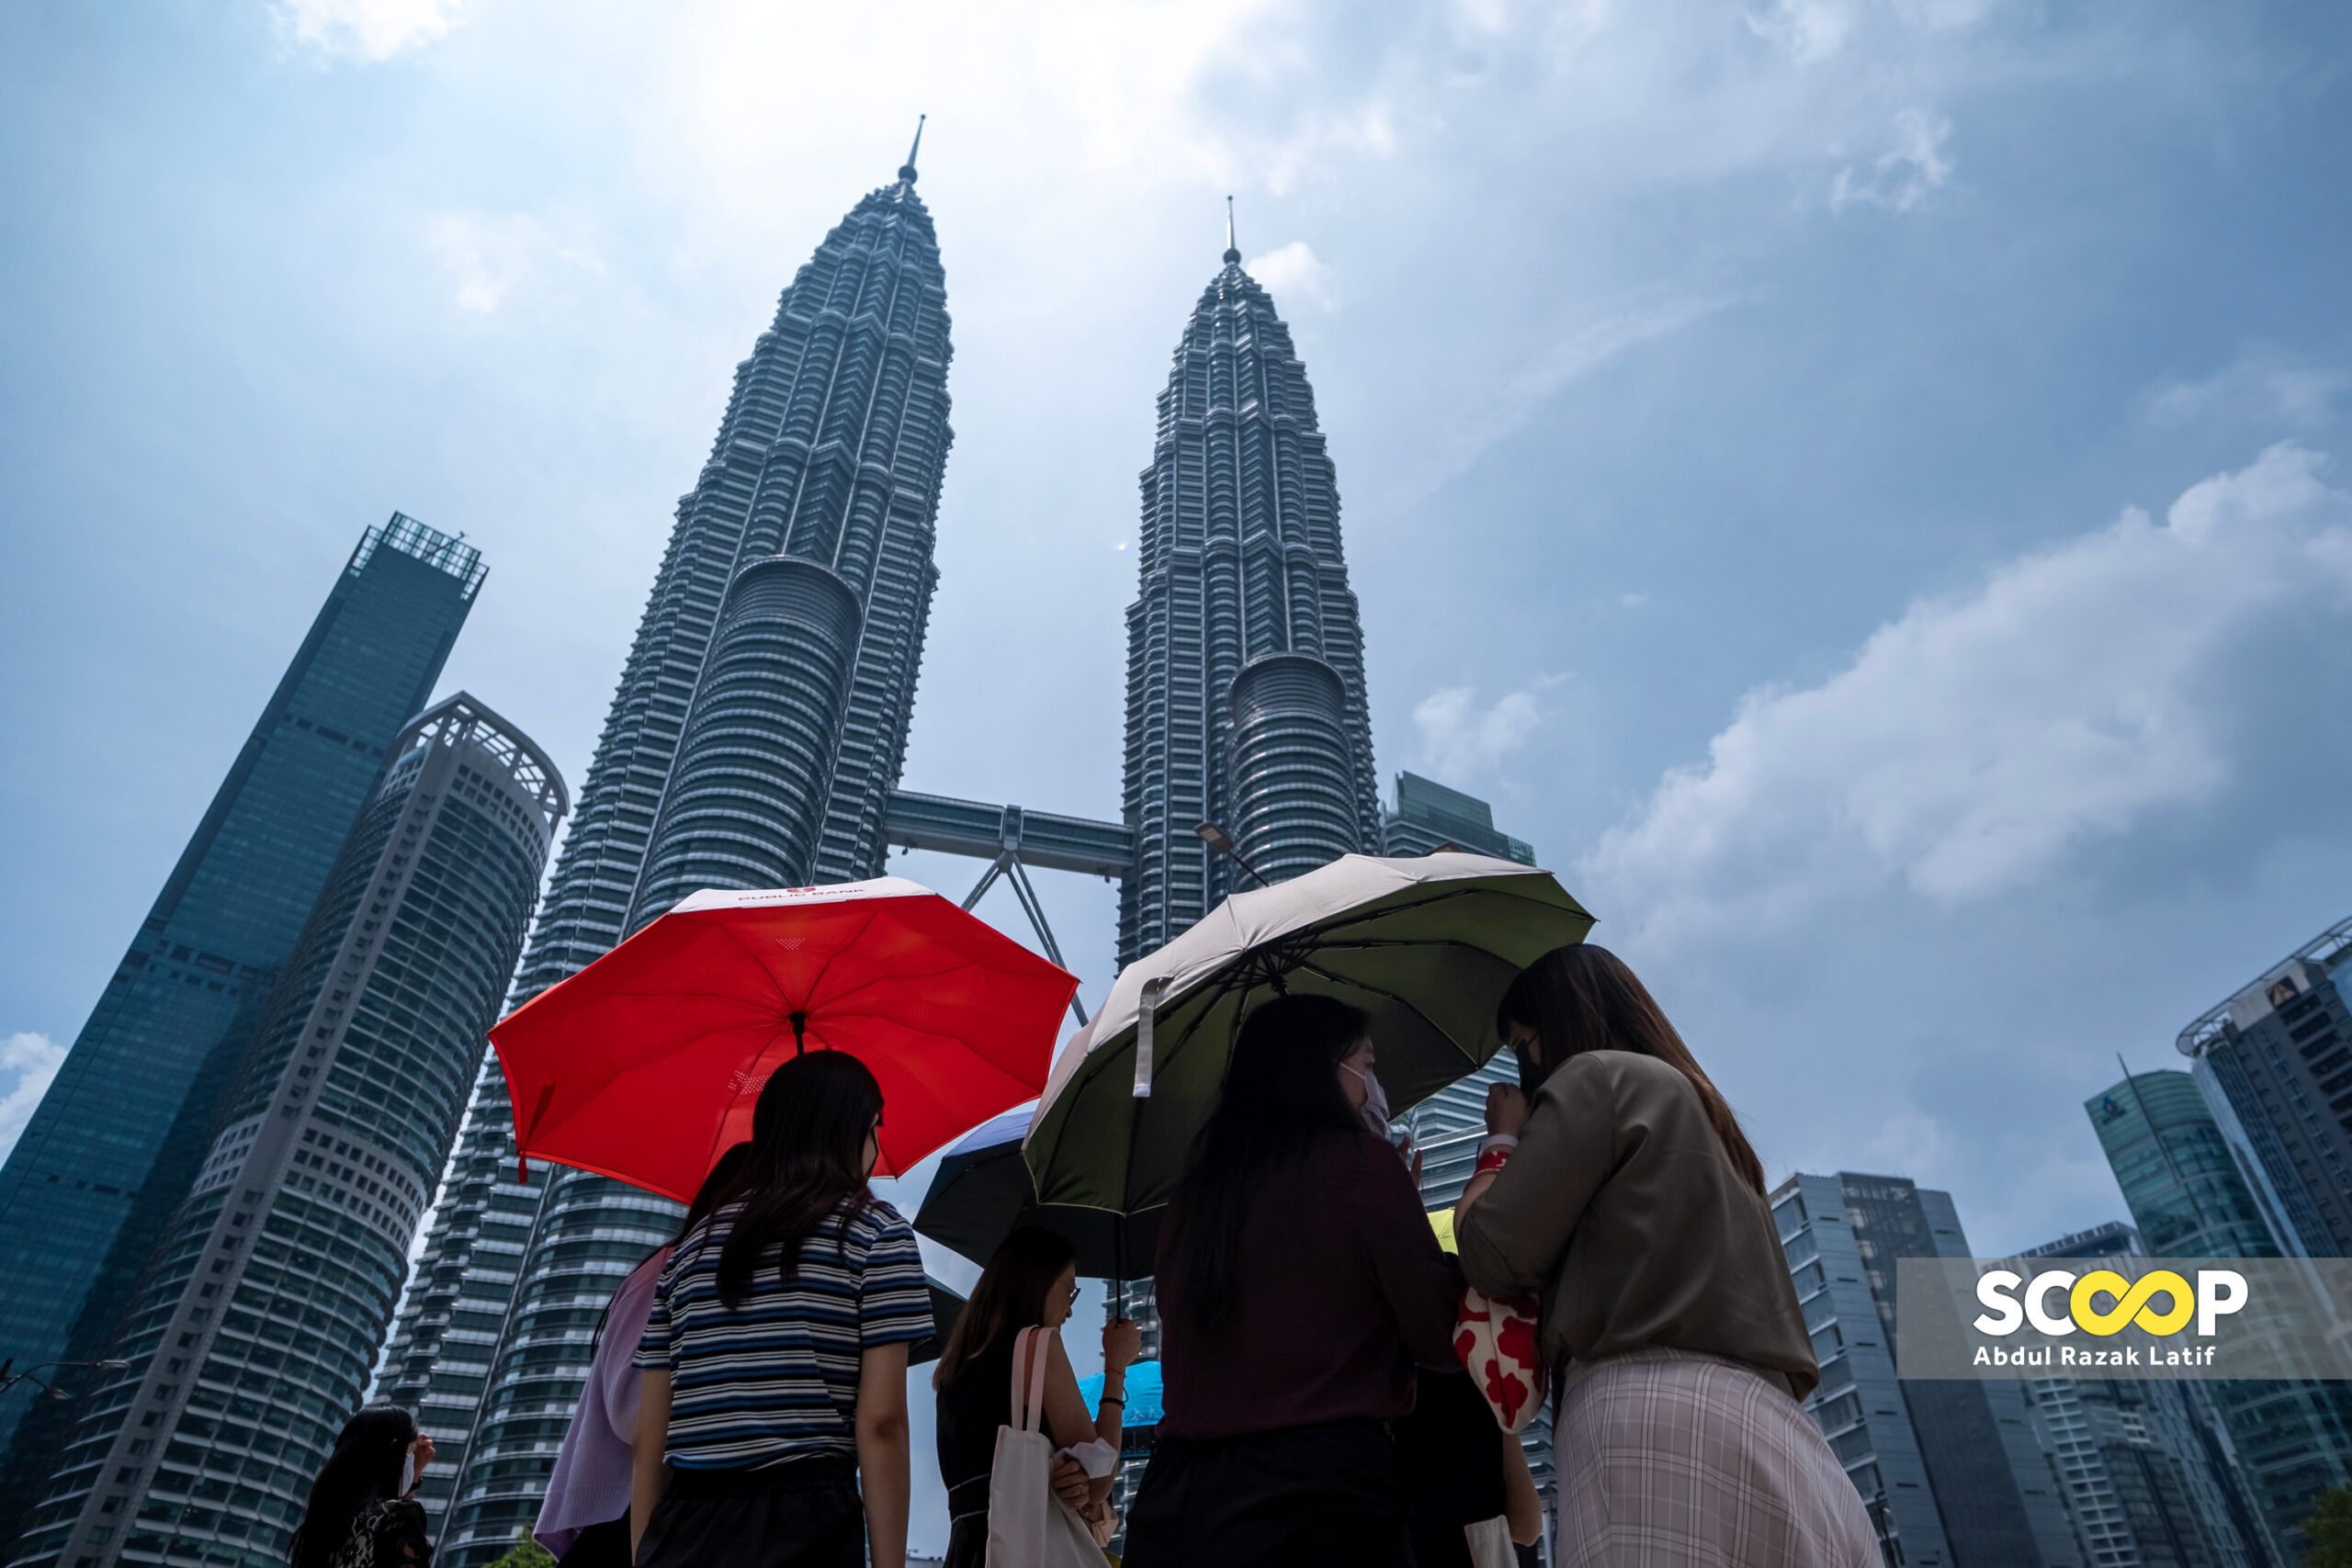 Lower rainfall until September, public cautioned against open burning, haze: MetMalaysia